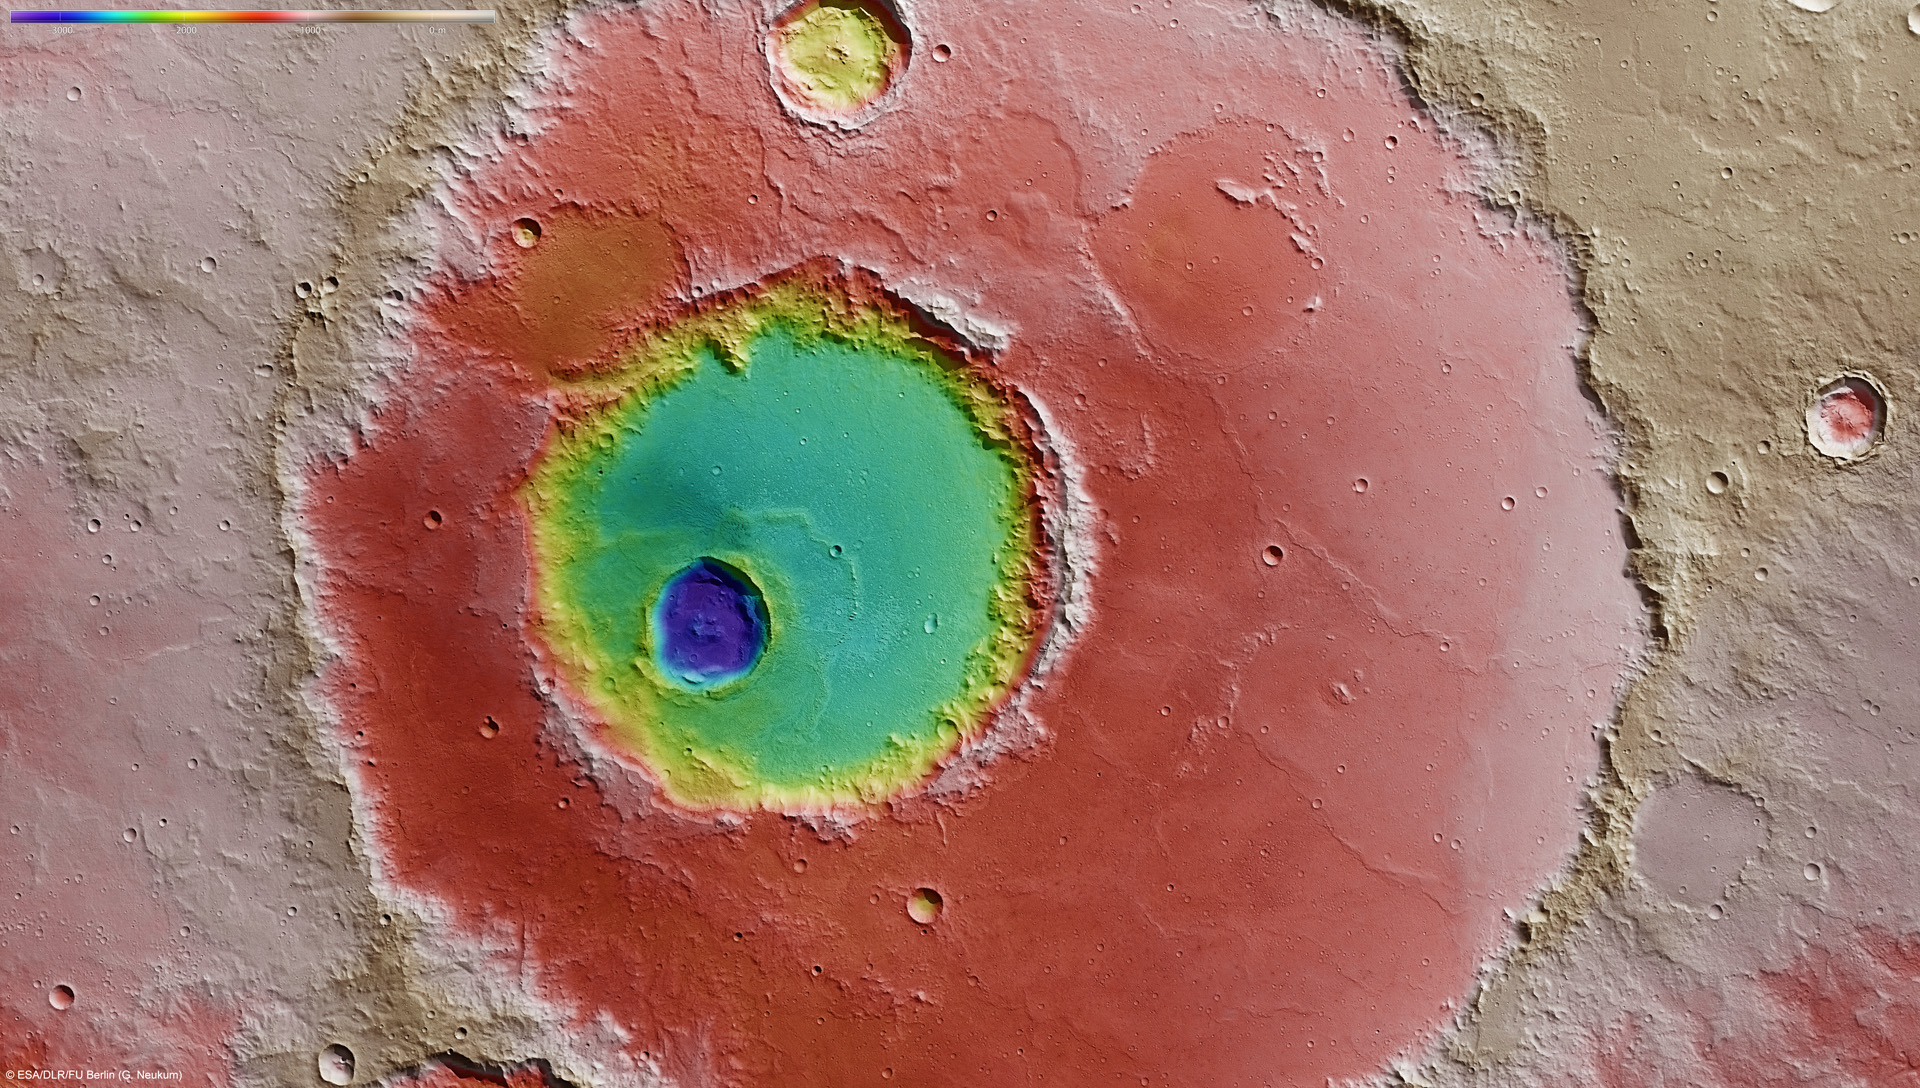 Mars express captures possible traces of water